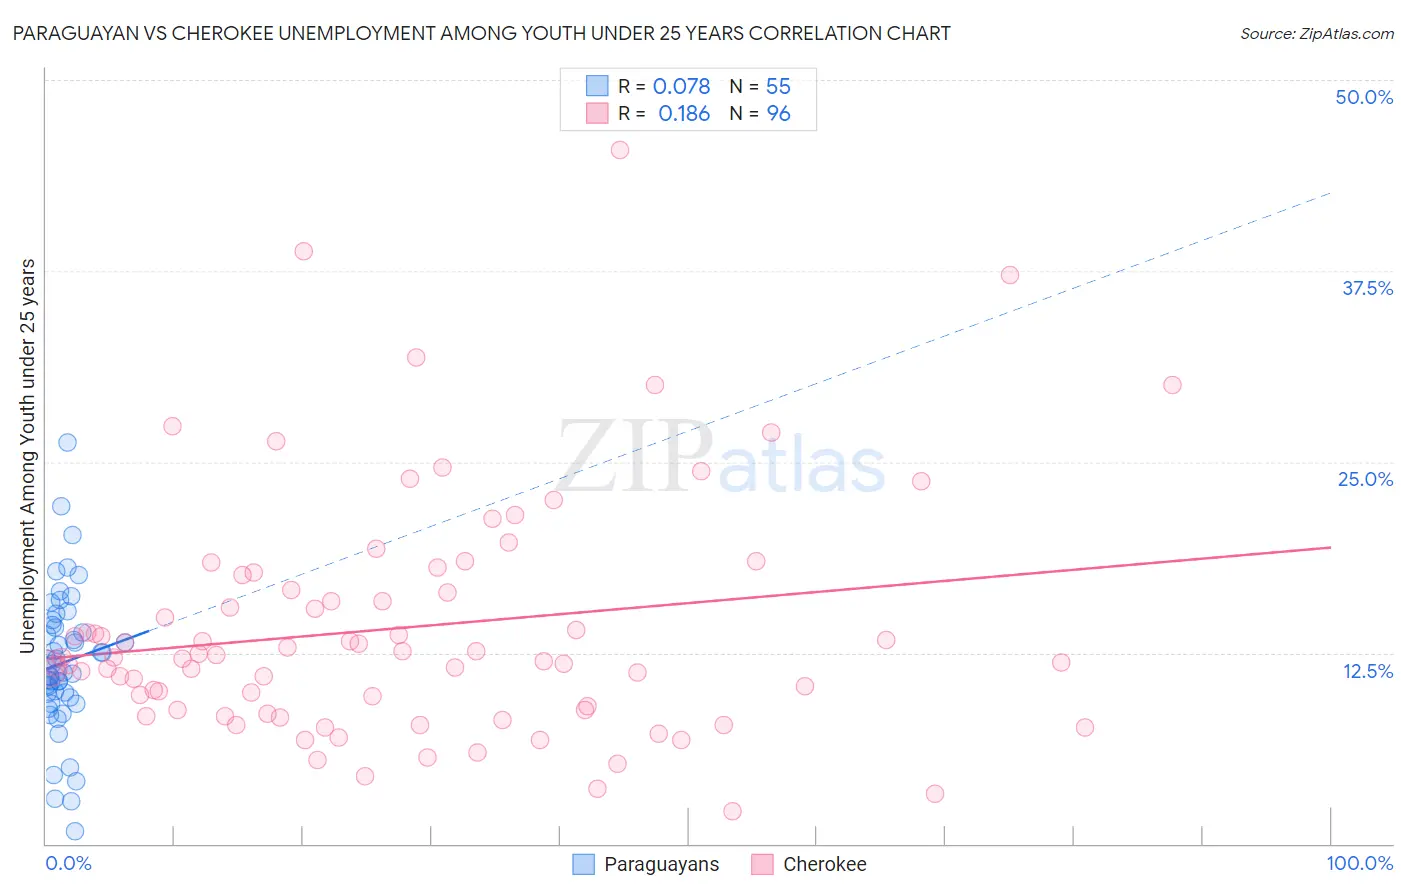 Paraguayan vs Cherokee Unemployment Among Youth under 25 years